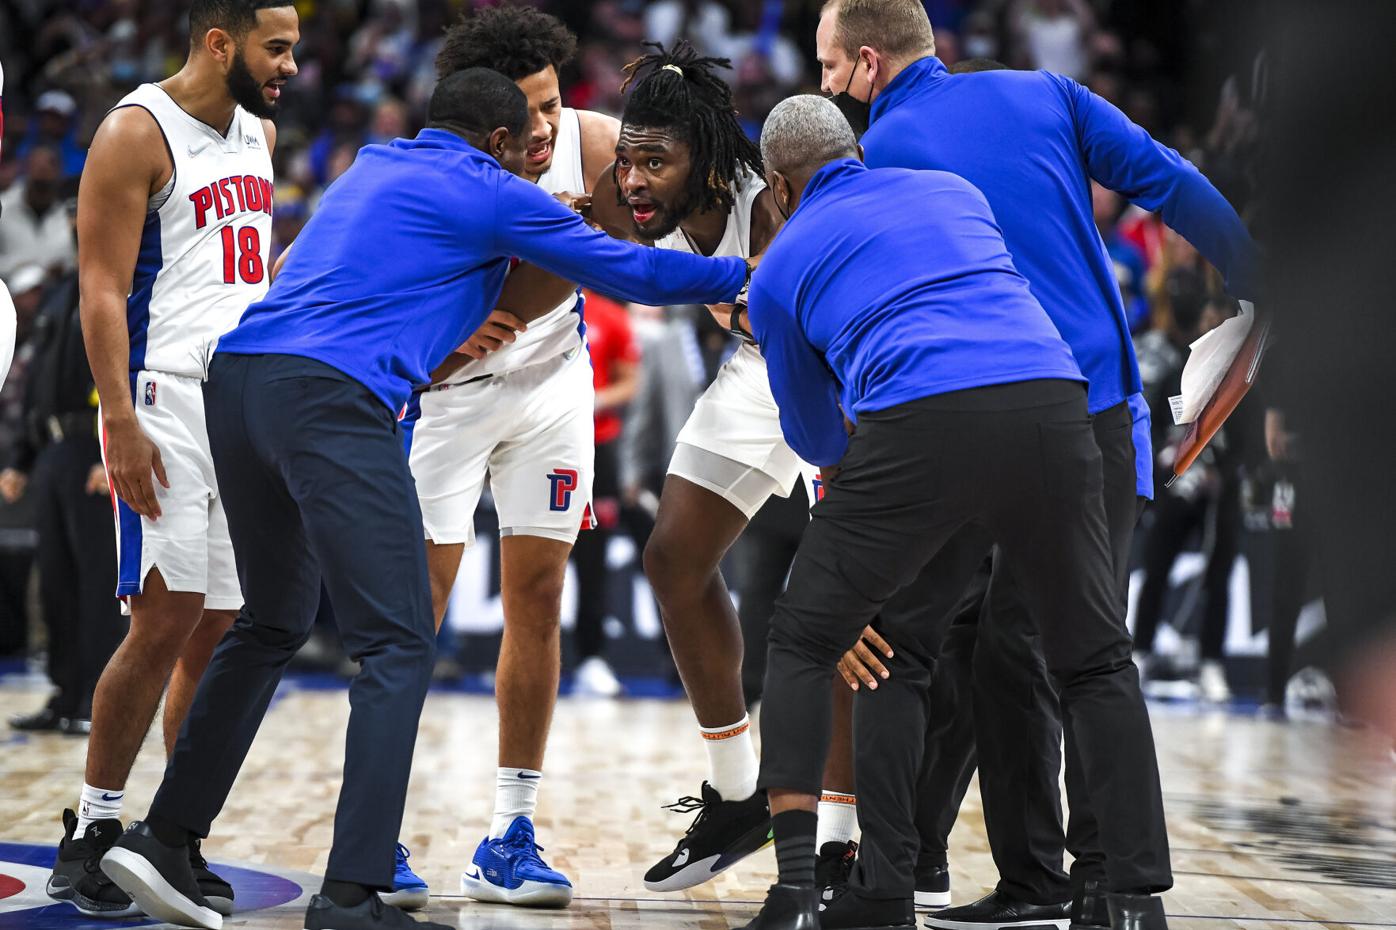 Lakers LeBron James, Pistons forward Isaiah Stewart ejected after  altercation